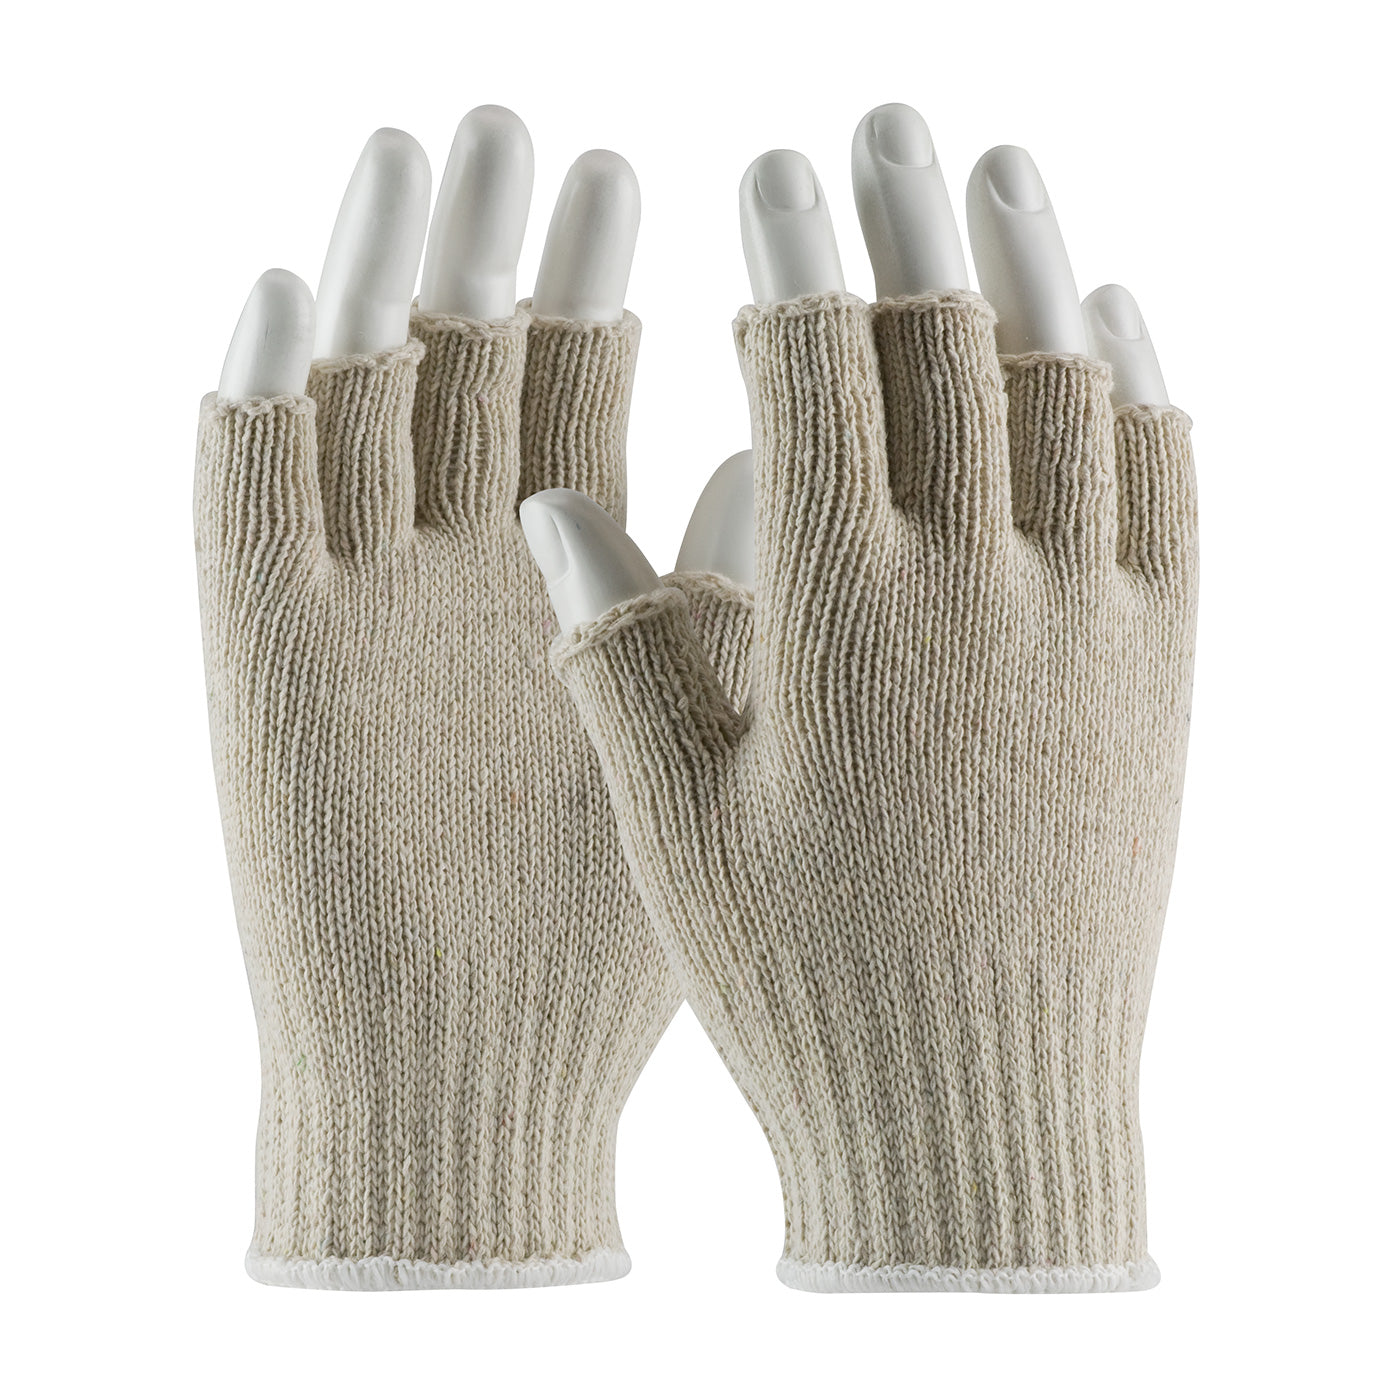 PIP 35-C119/S Medium Weight Seamless Knit Cotton/Polyester Glove - Natural with Half-Finger